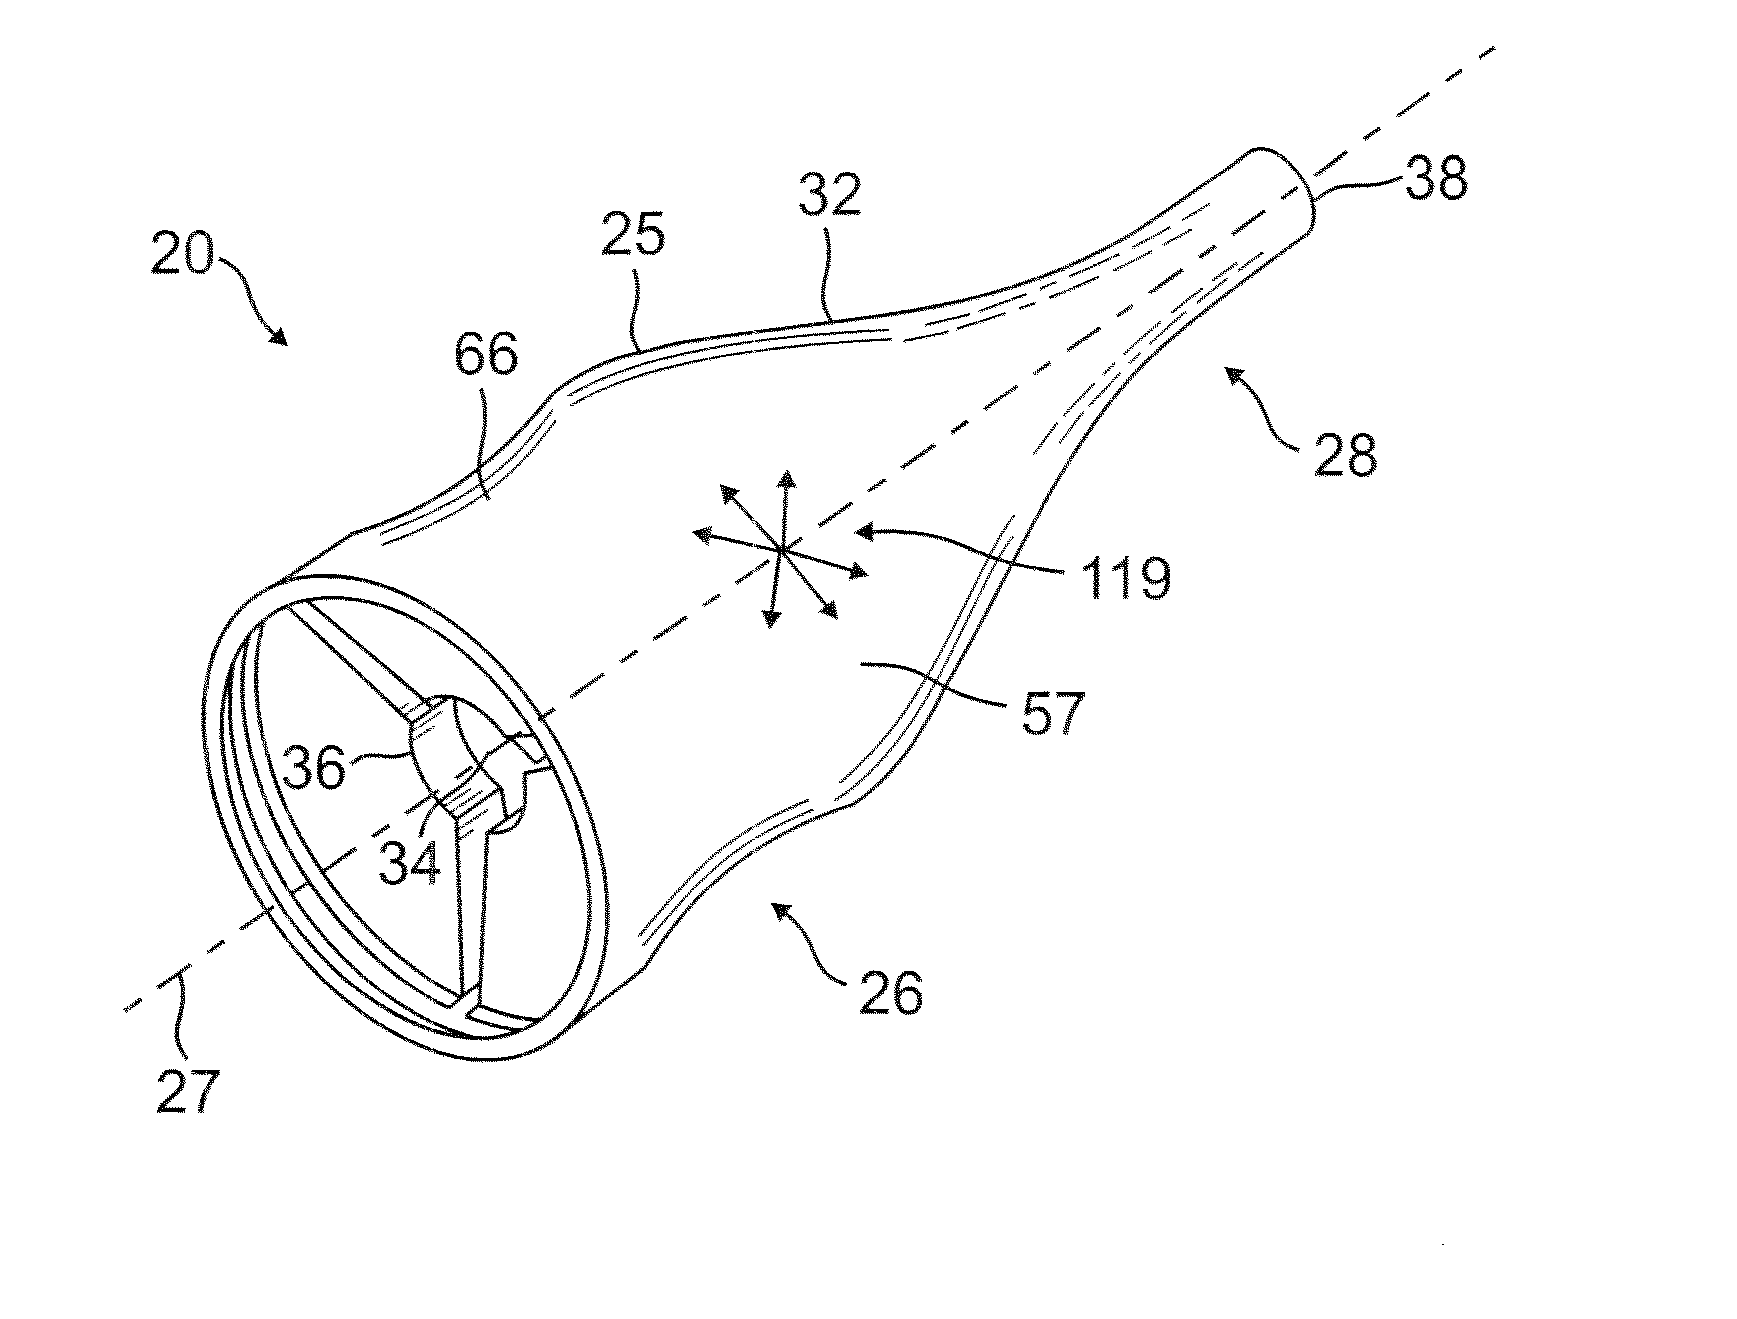 Acoustically treated exhaust centerbody for jet engines and associated methods